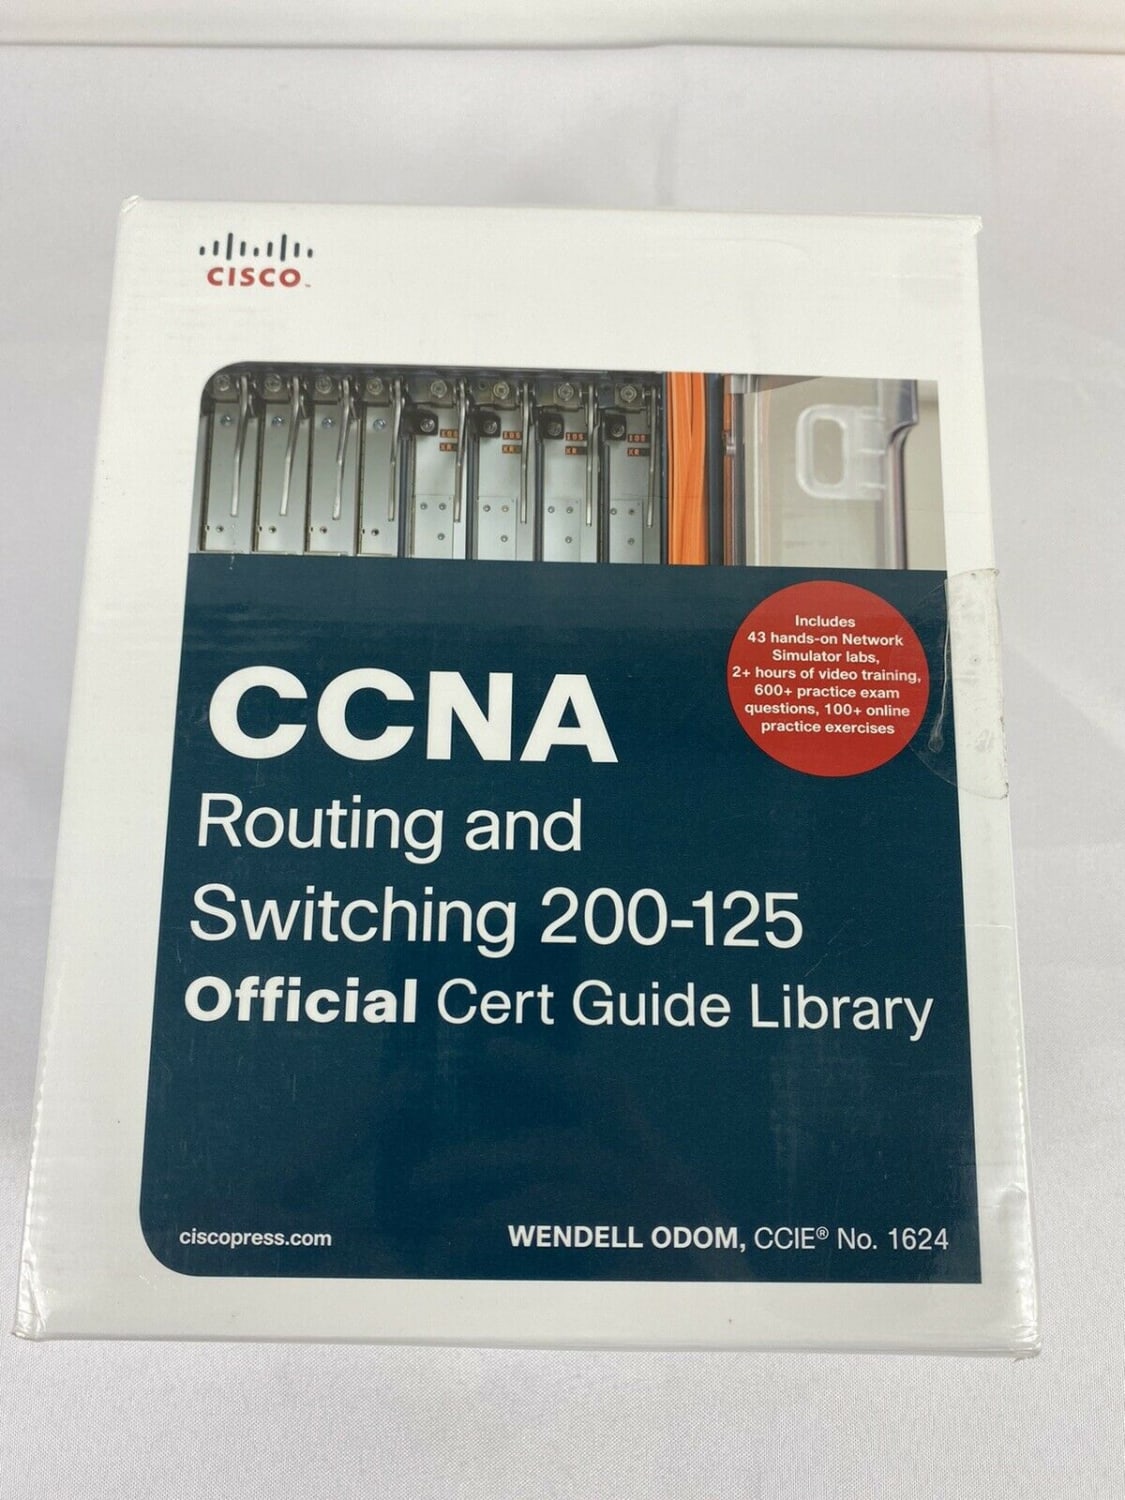 CCNA Routing and Switching 200-125 Cert: A Perfect Guide Summary.